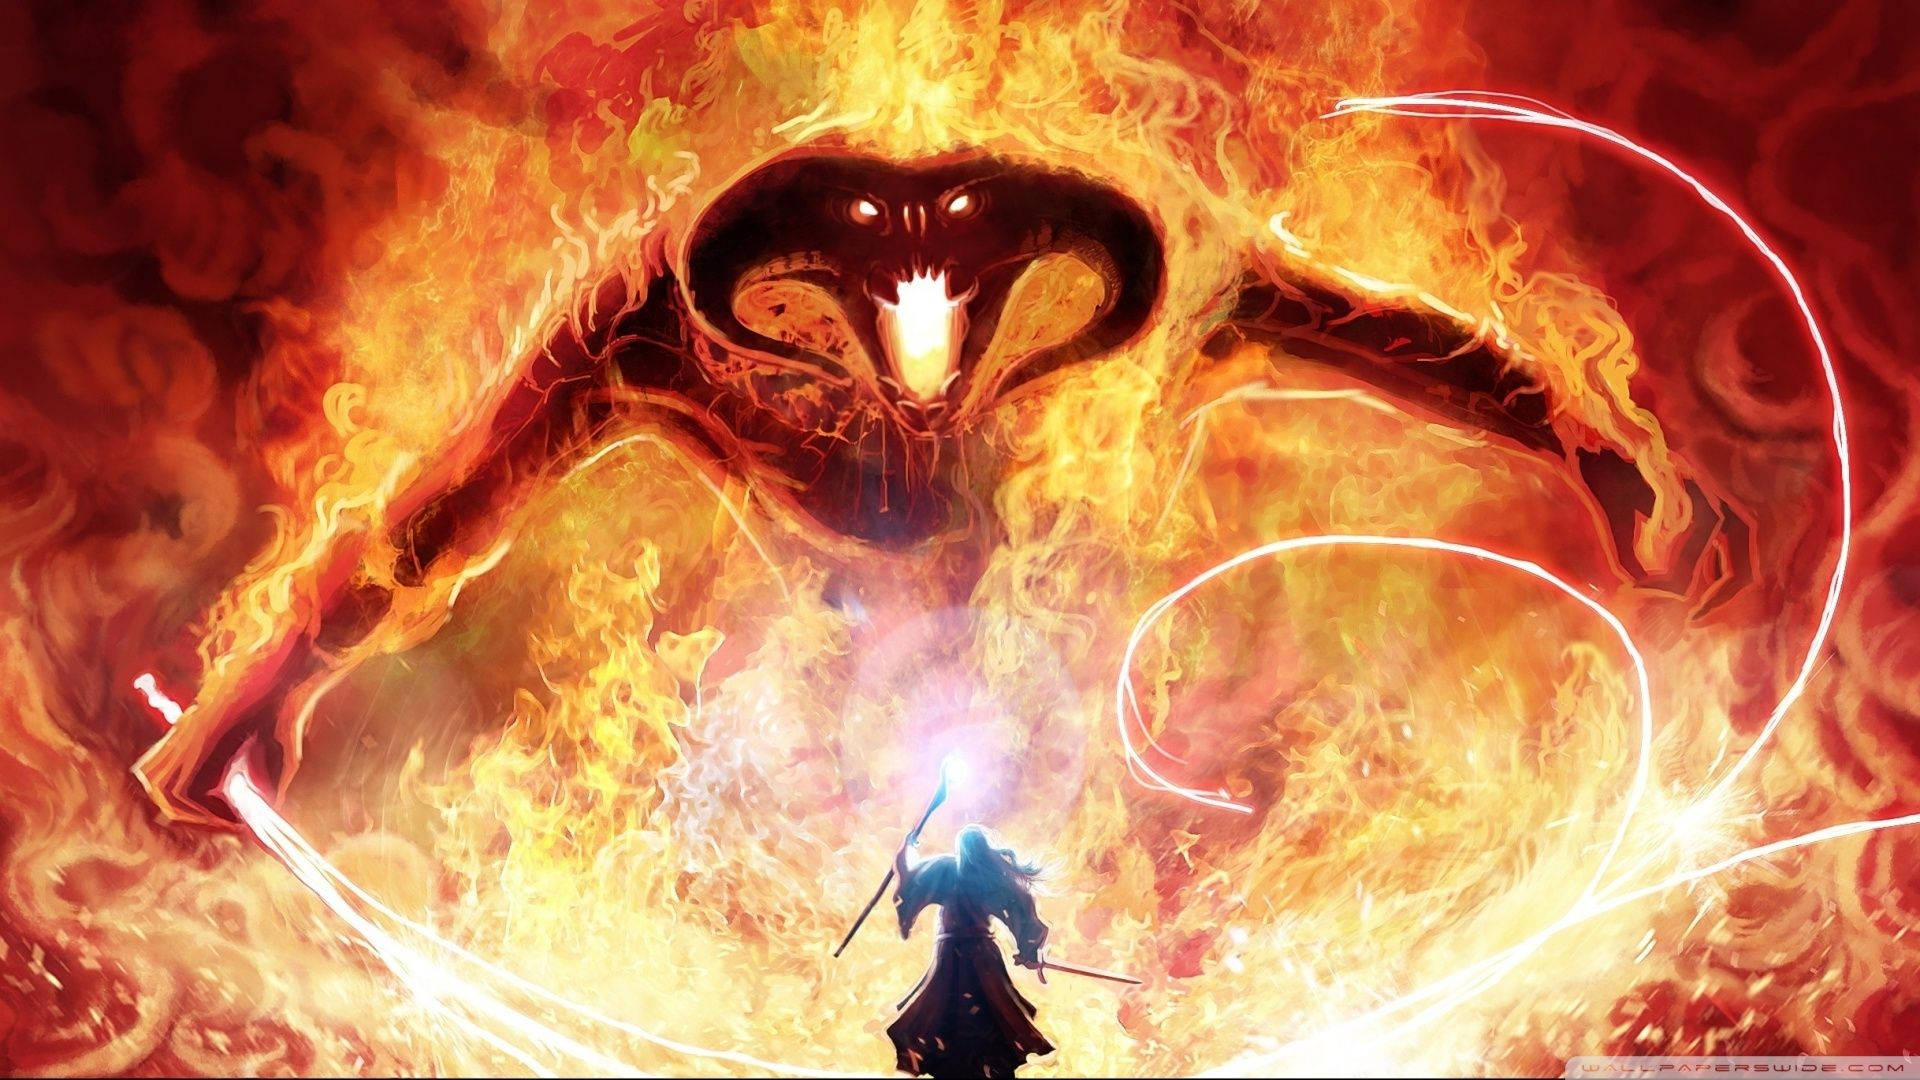 Lotr Fiery Durin's Bane Balrog Background